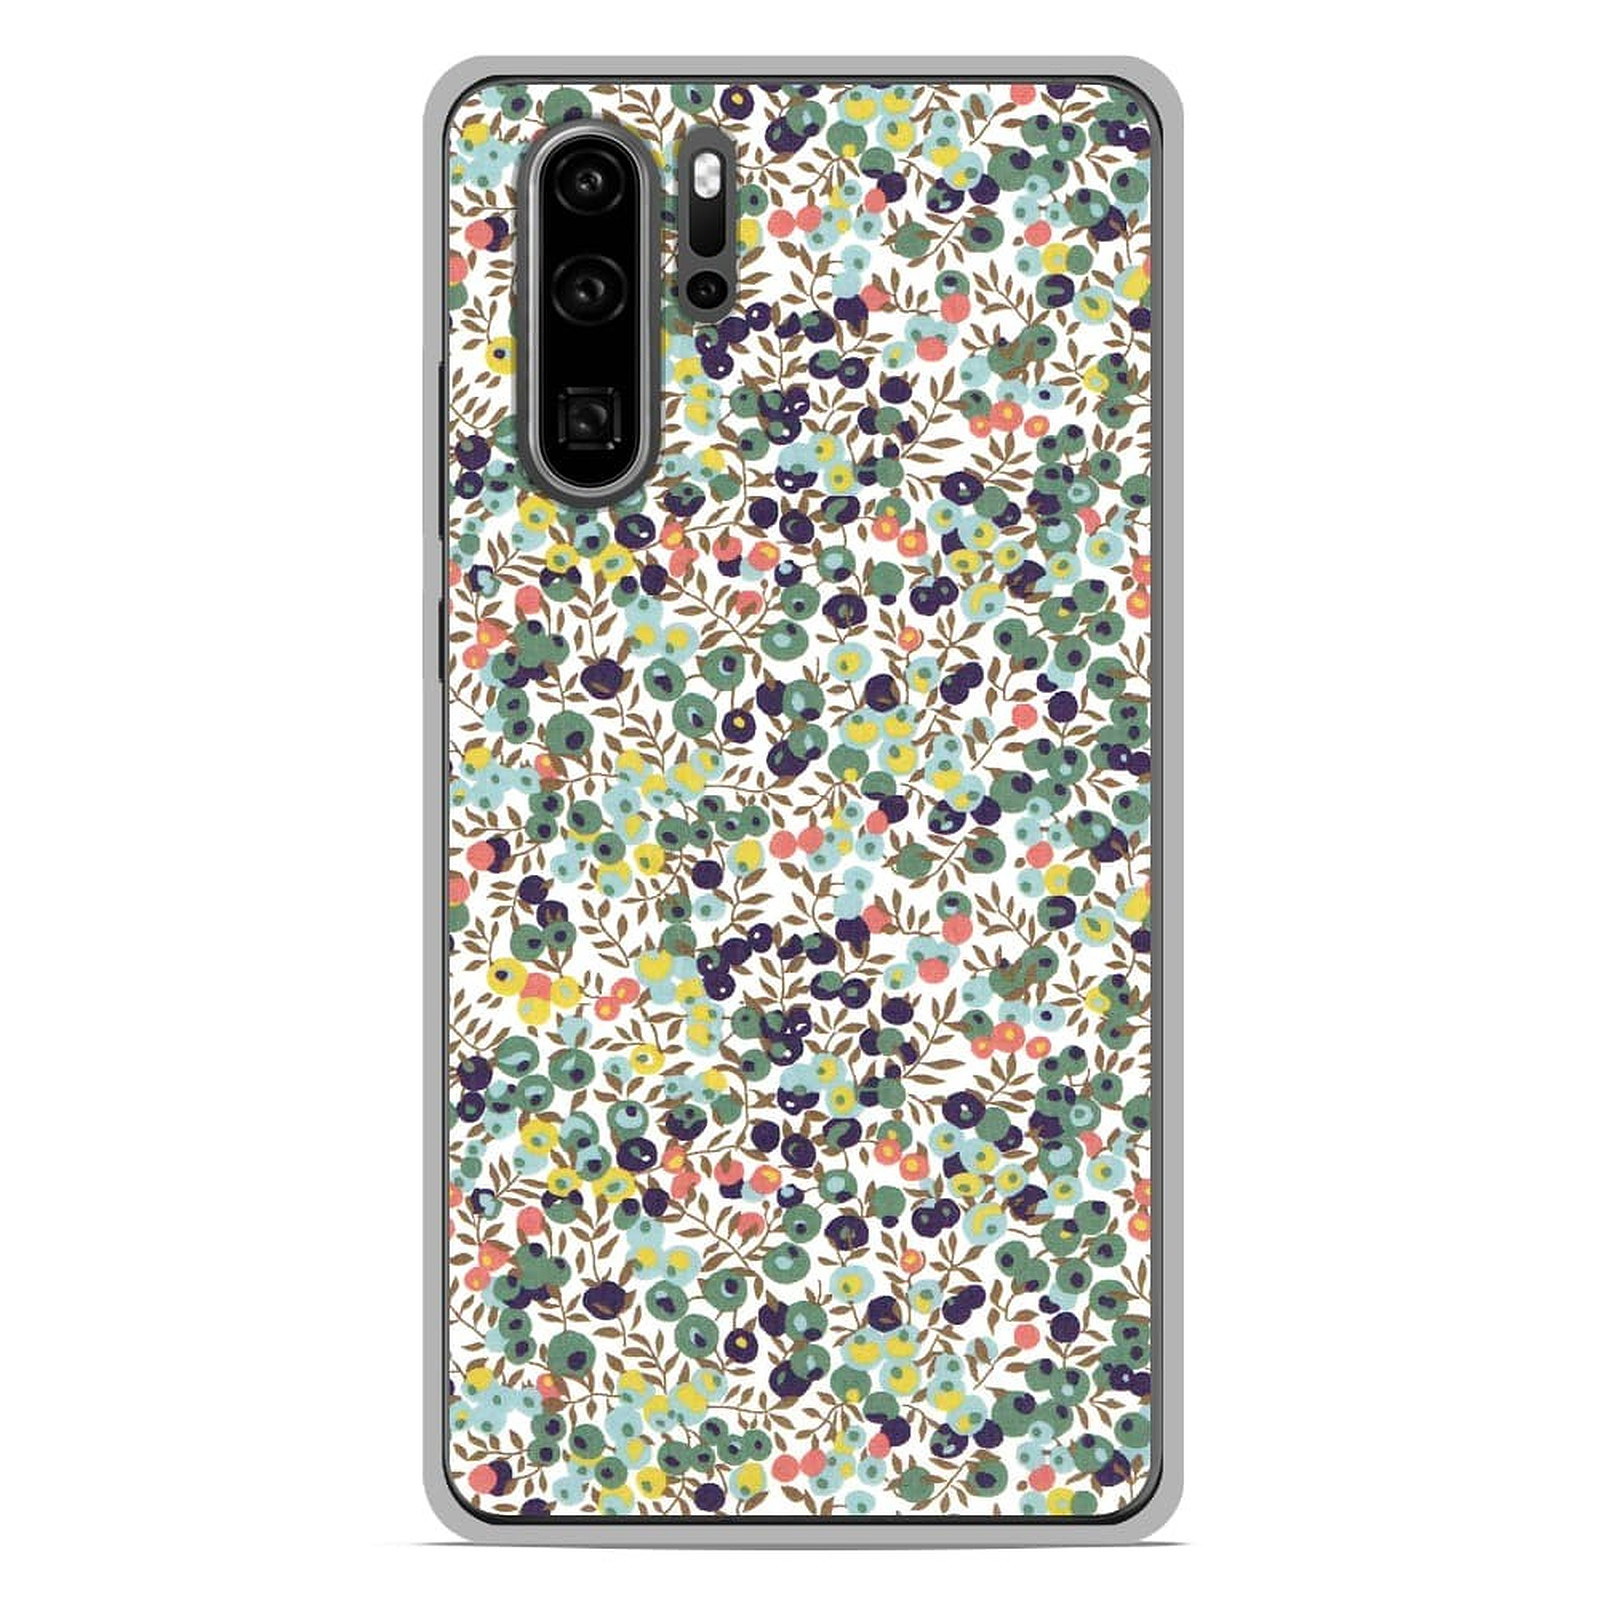 1001 Coques Coque silicone gel Huawei P30 Pro motif Liberty Wiltshire Vert - Coque telephone 1001Coques